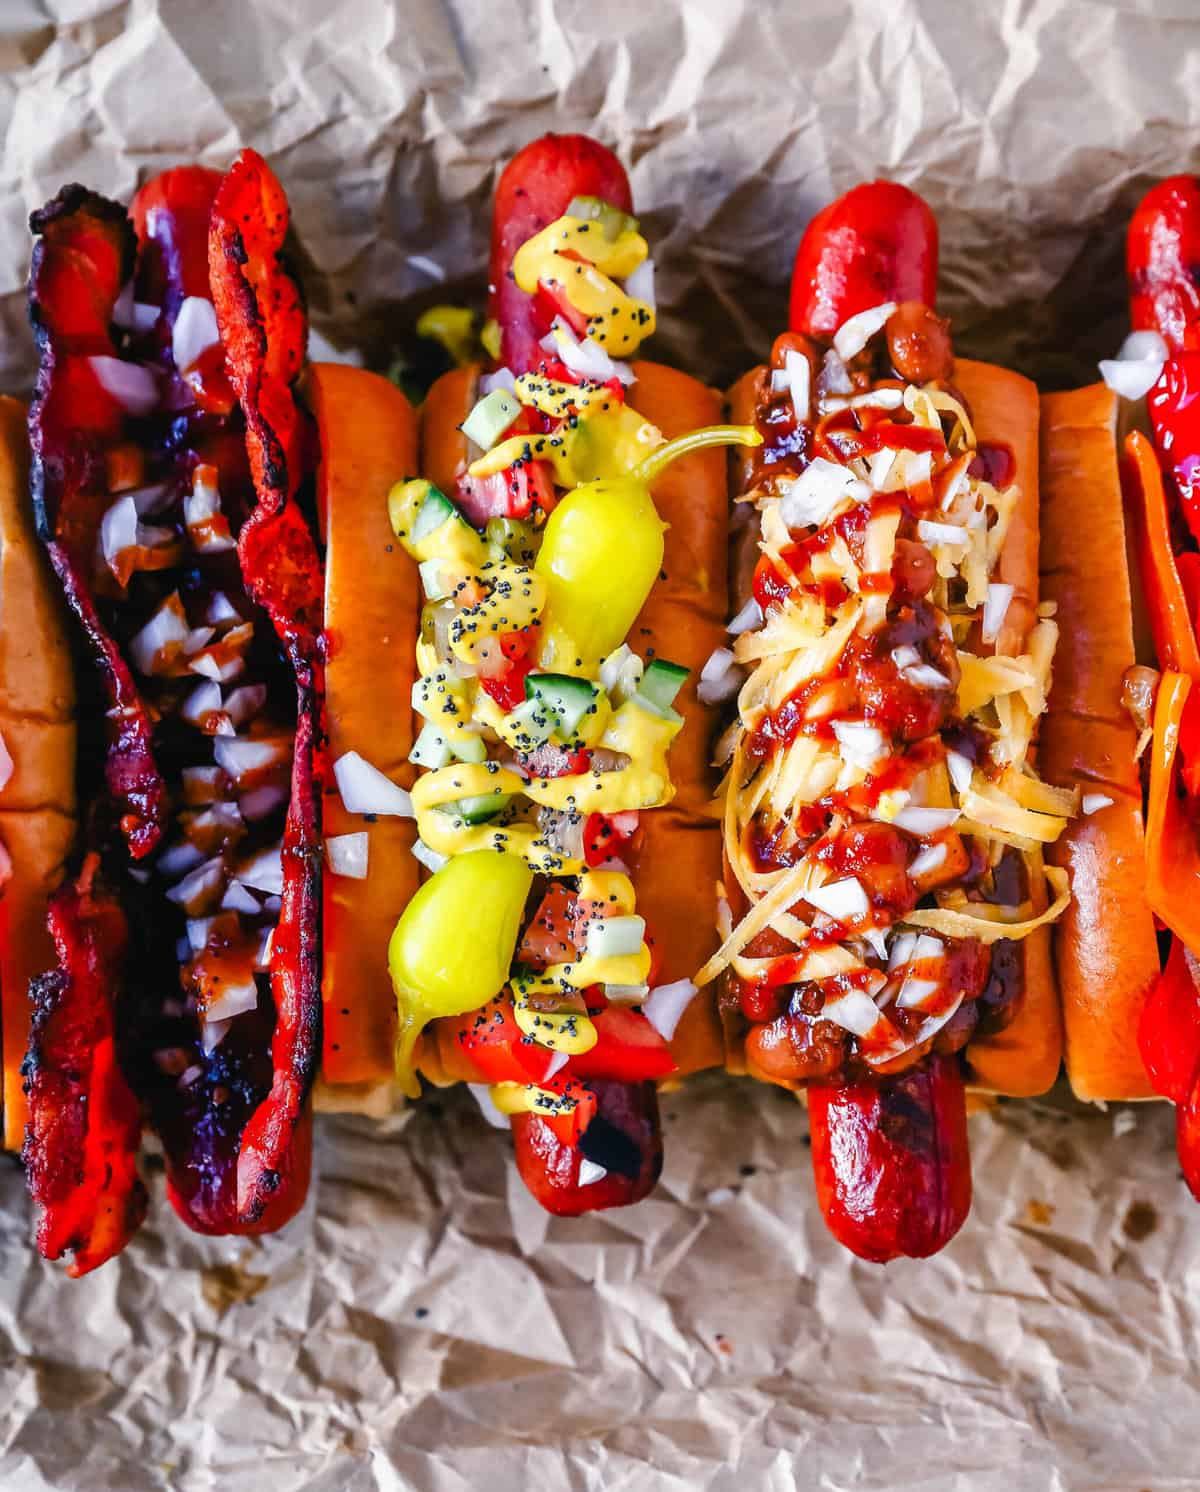 Chicago Hot Dog. Chicago Dog Toppings. How to create the ultimate Gourmet Hot Dogs with all of the delicious hot dog toppings. You can create famous hot dogs such as Chicago Dogs, Chili Dogs, and even BBQ Bacon Dogs. Tips on how to turn an ordinary hot dog into the most flavorful hot dog you will ever eat!